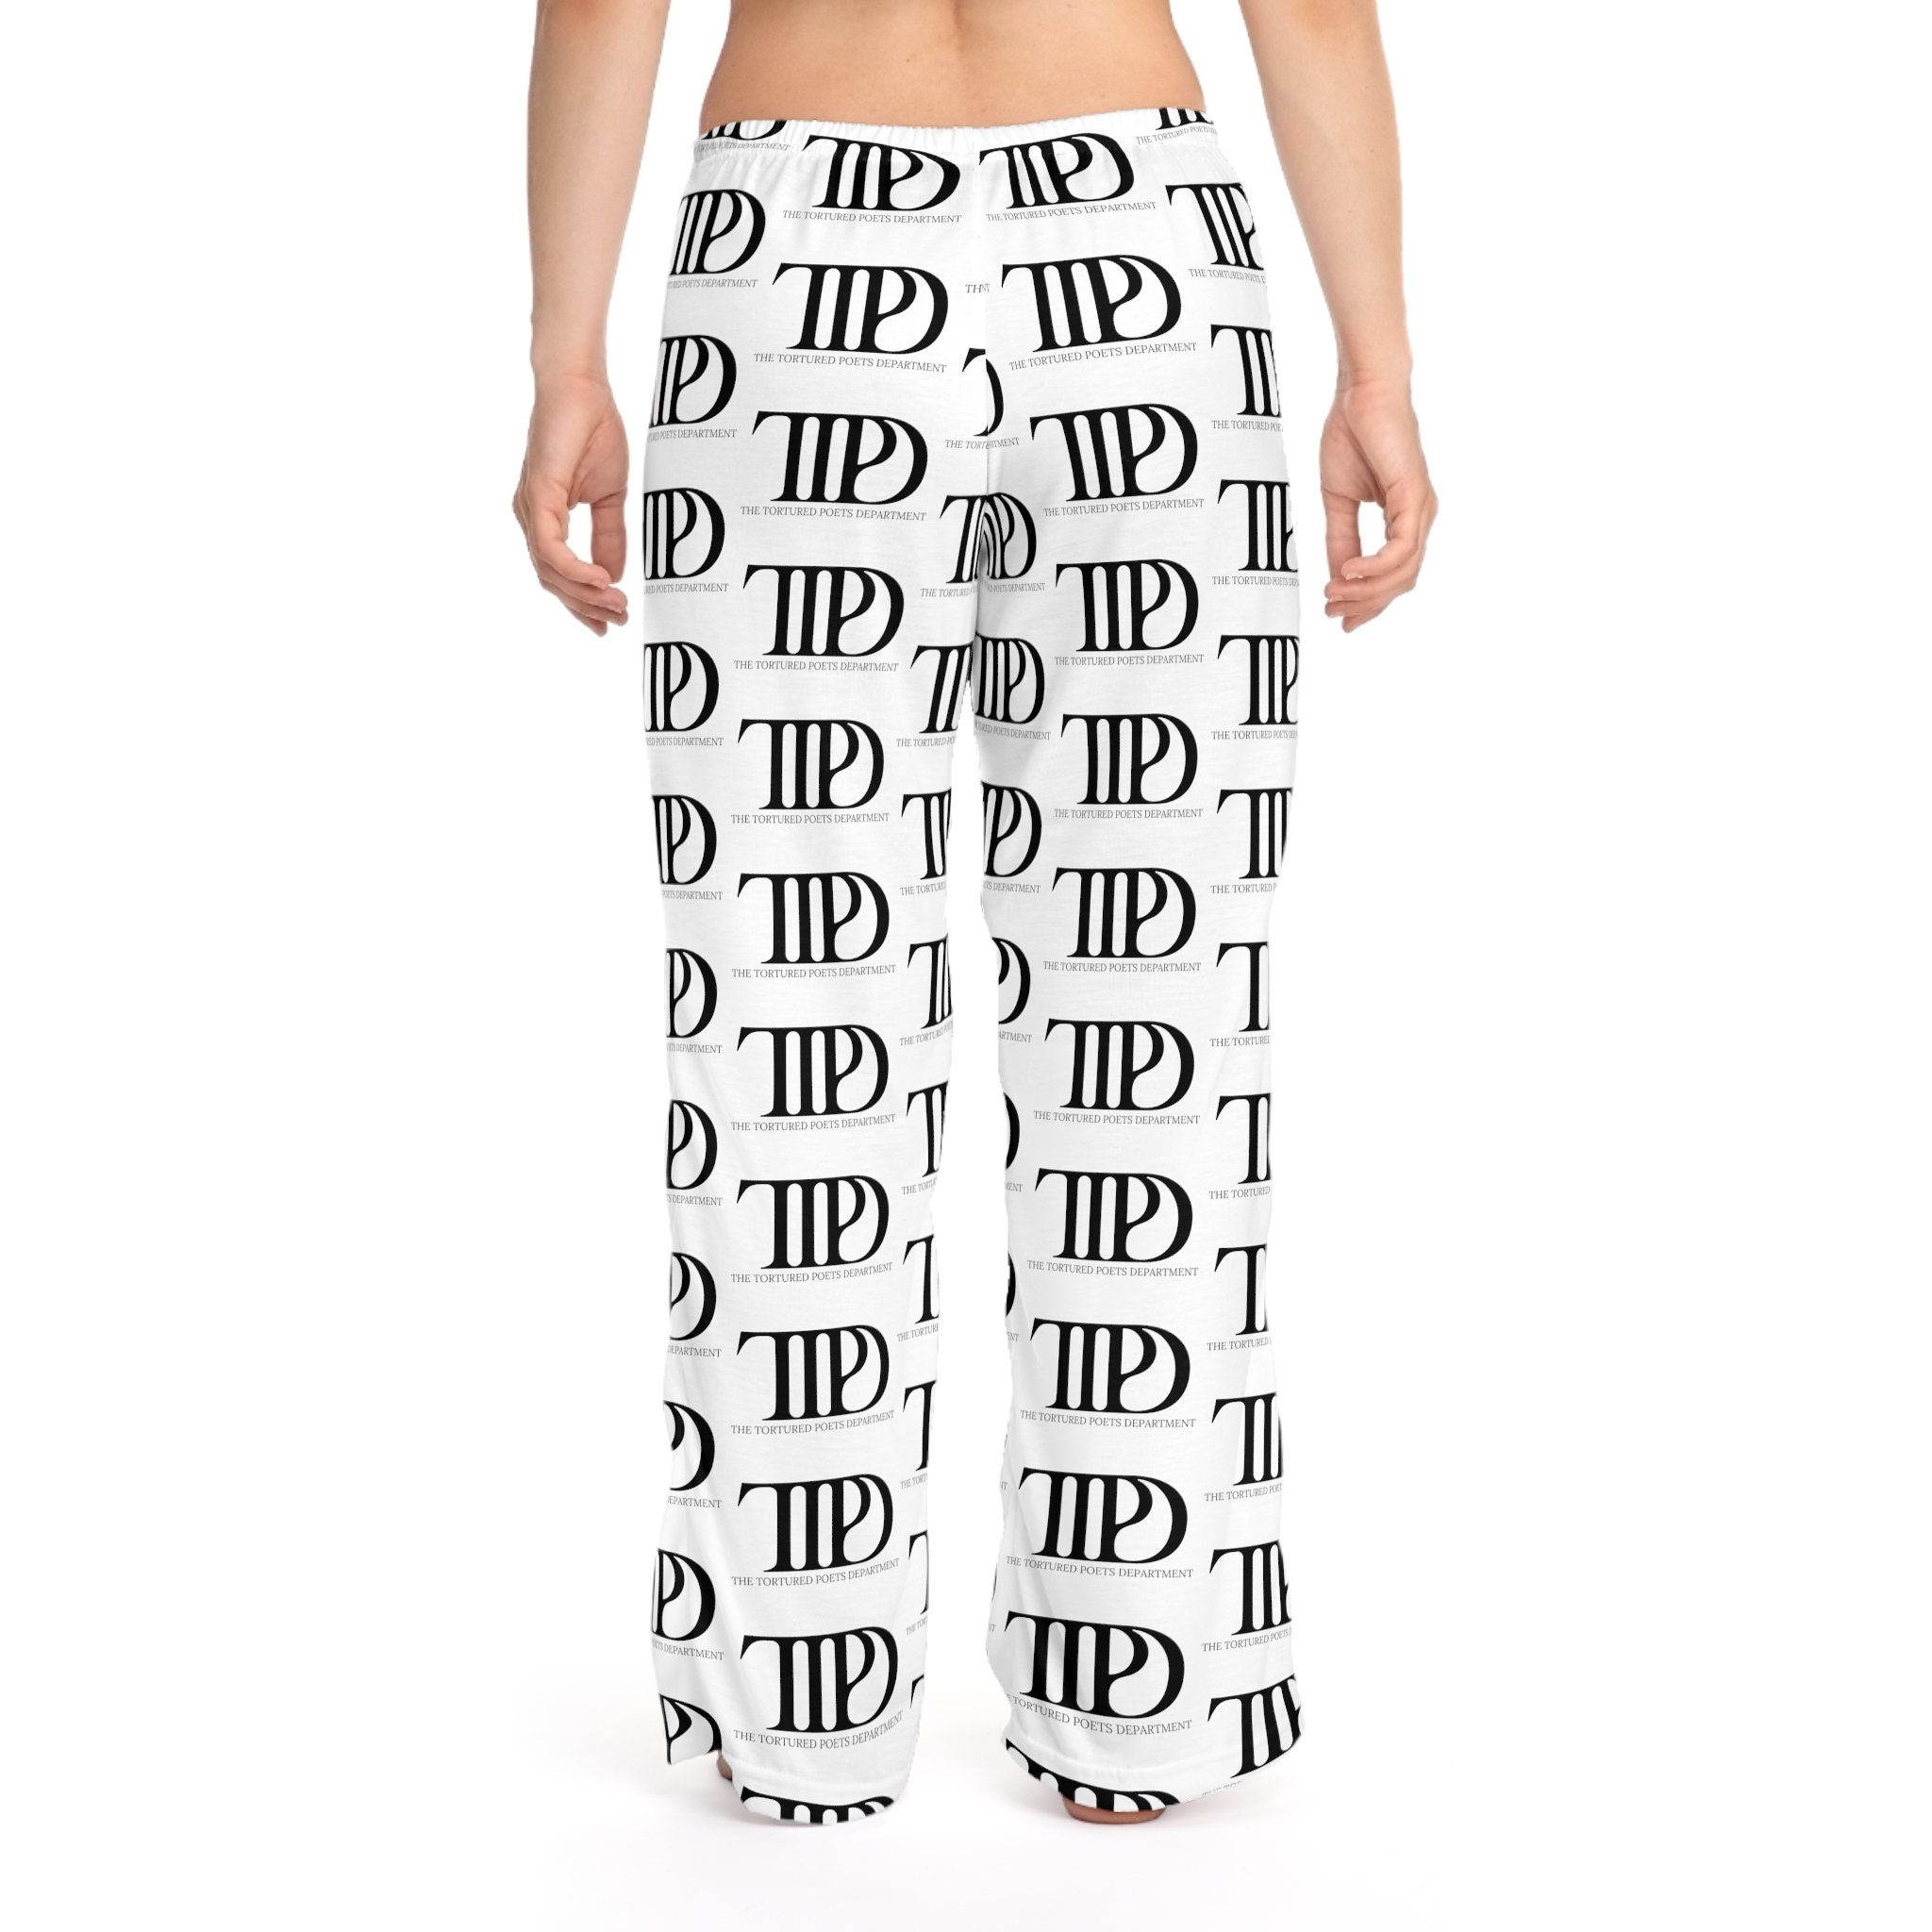 TTPD Poet Women's Pajama Pants (AOP), Taylor Merch, Gift For Mother's day